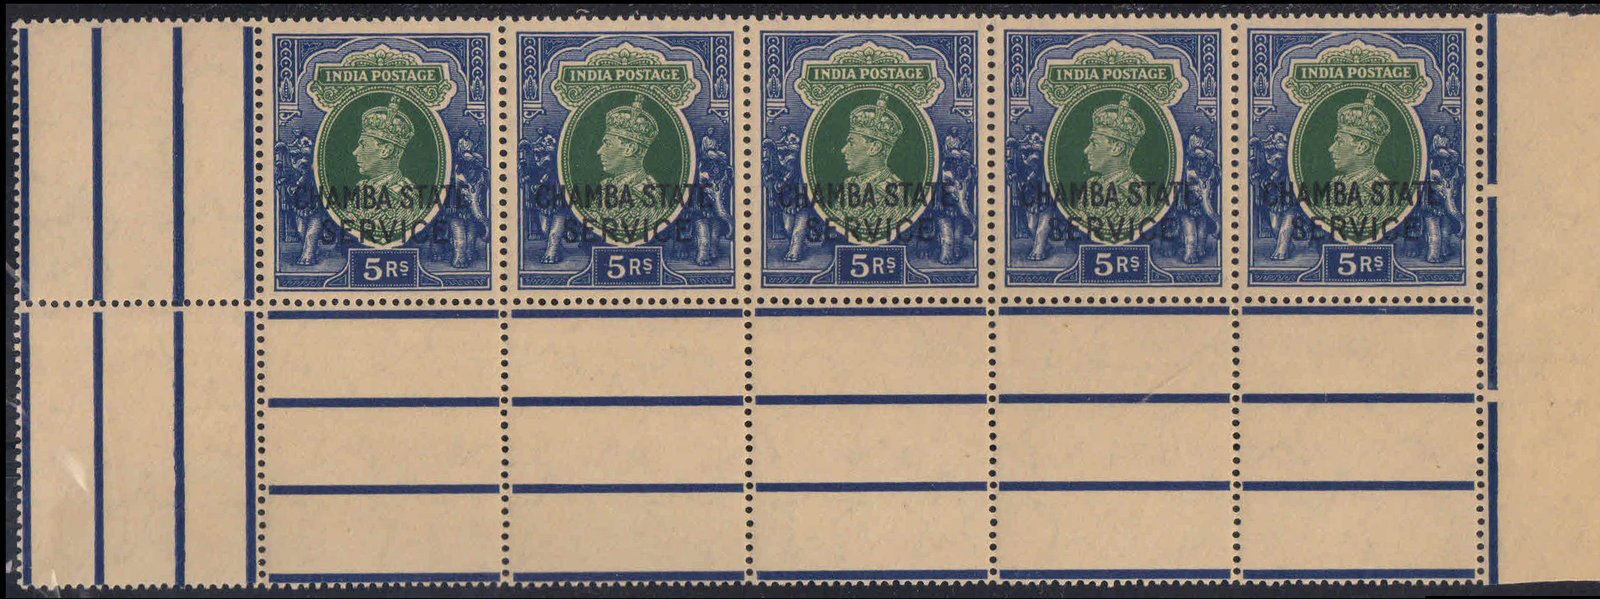 CHAMBA STATE 1945-King George 5 Rs.-Strip of 5 with Gutter Margins, MNH, S.G. 070-Cat Value £ 300-